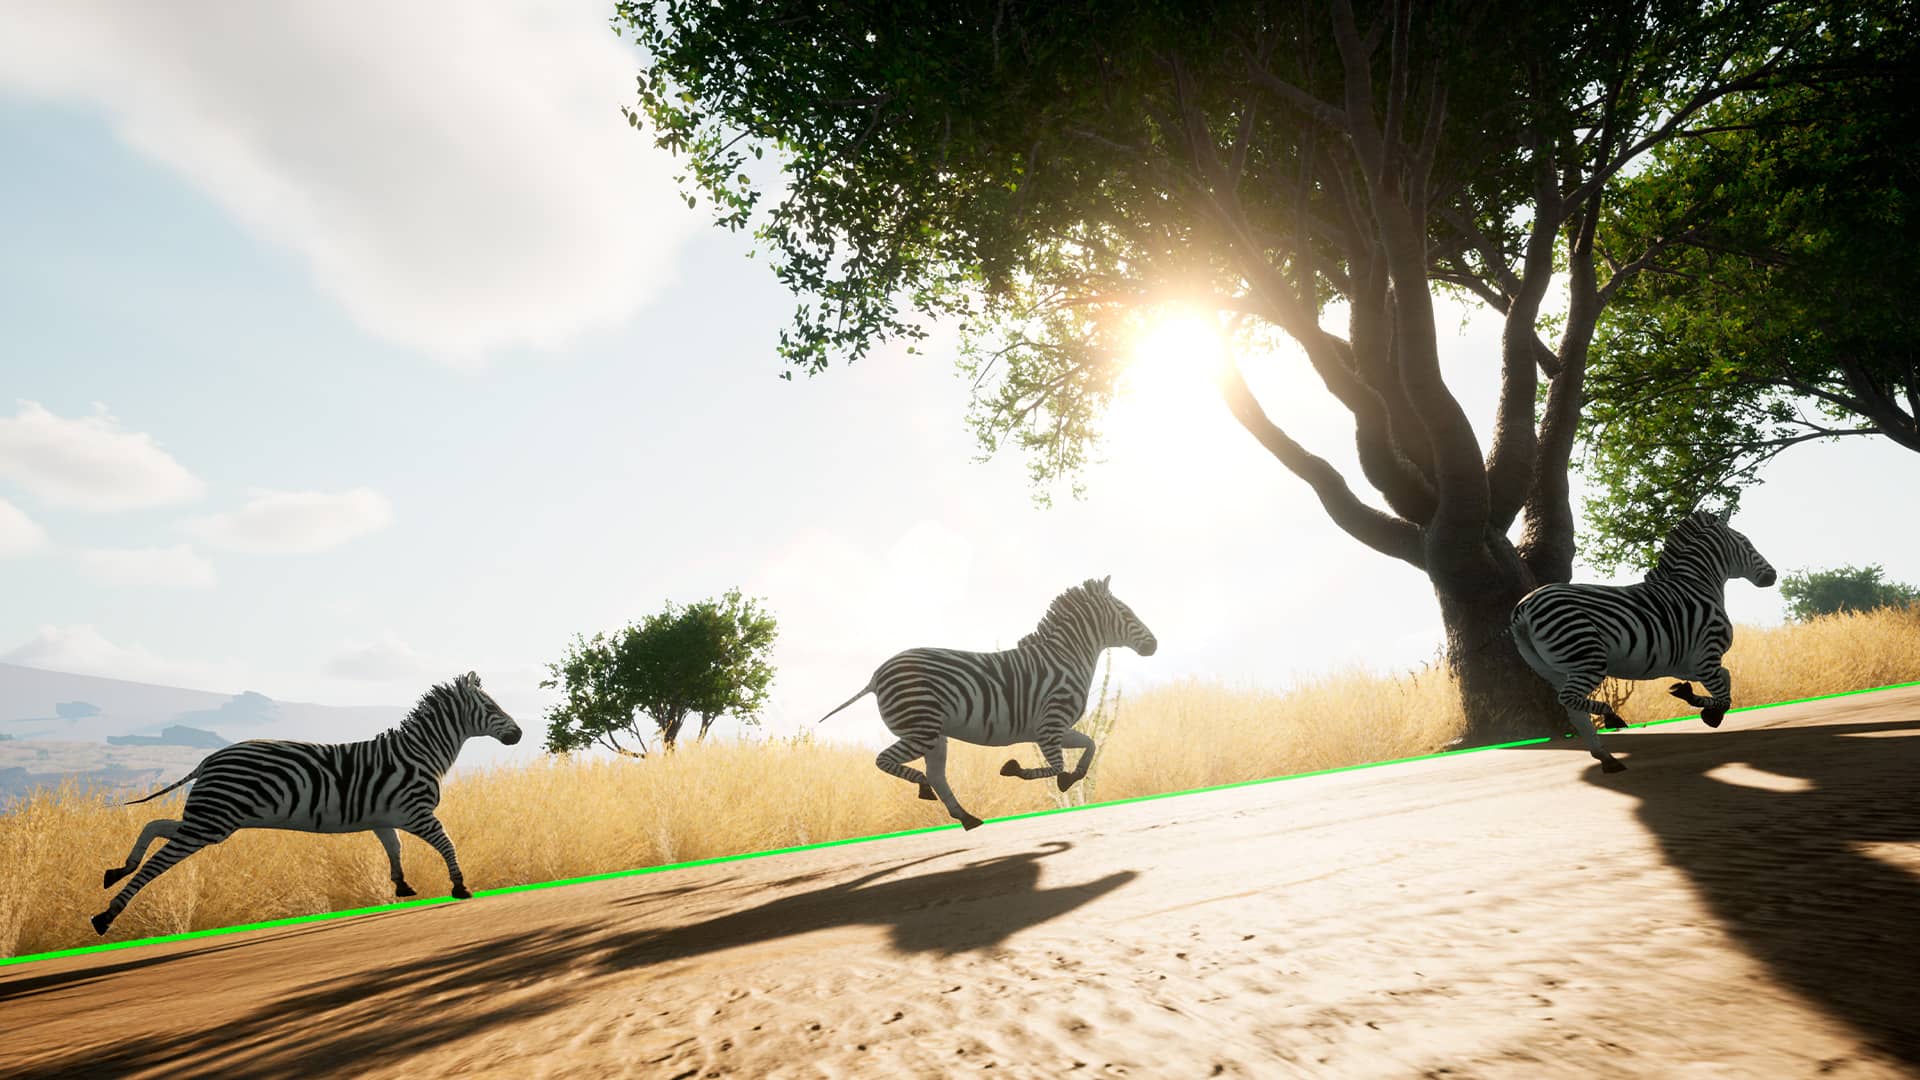 Book an indoor cycling safari with intelligent cycling’s vr-ready savanna